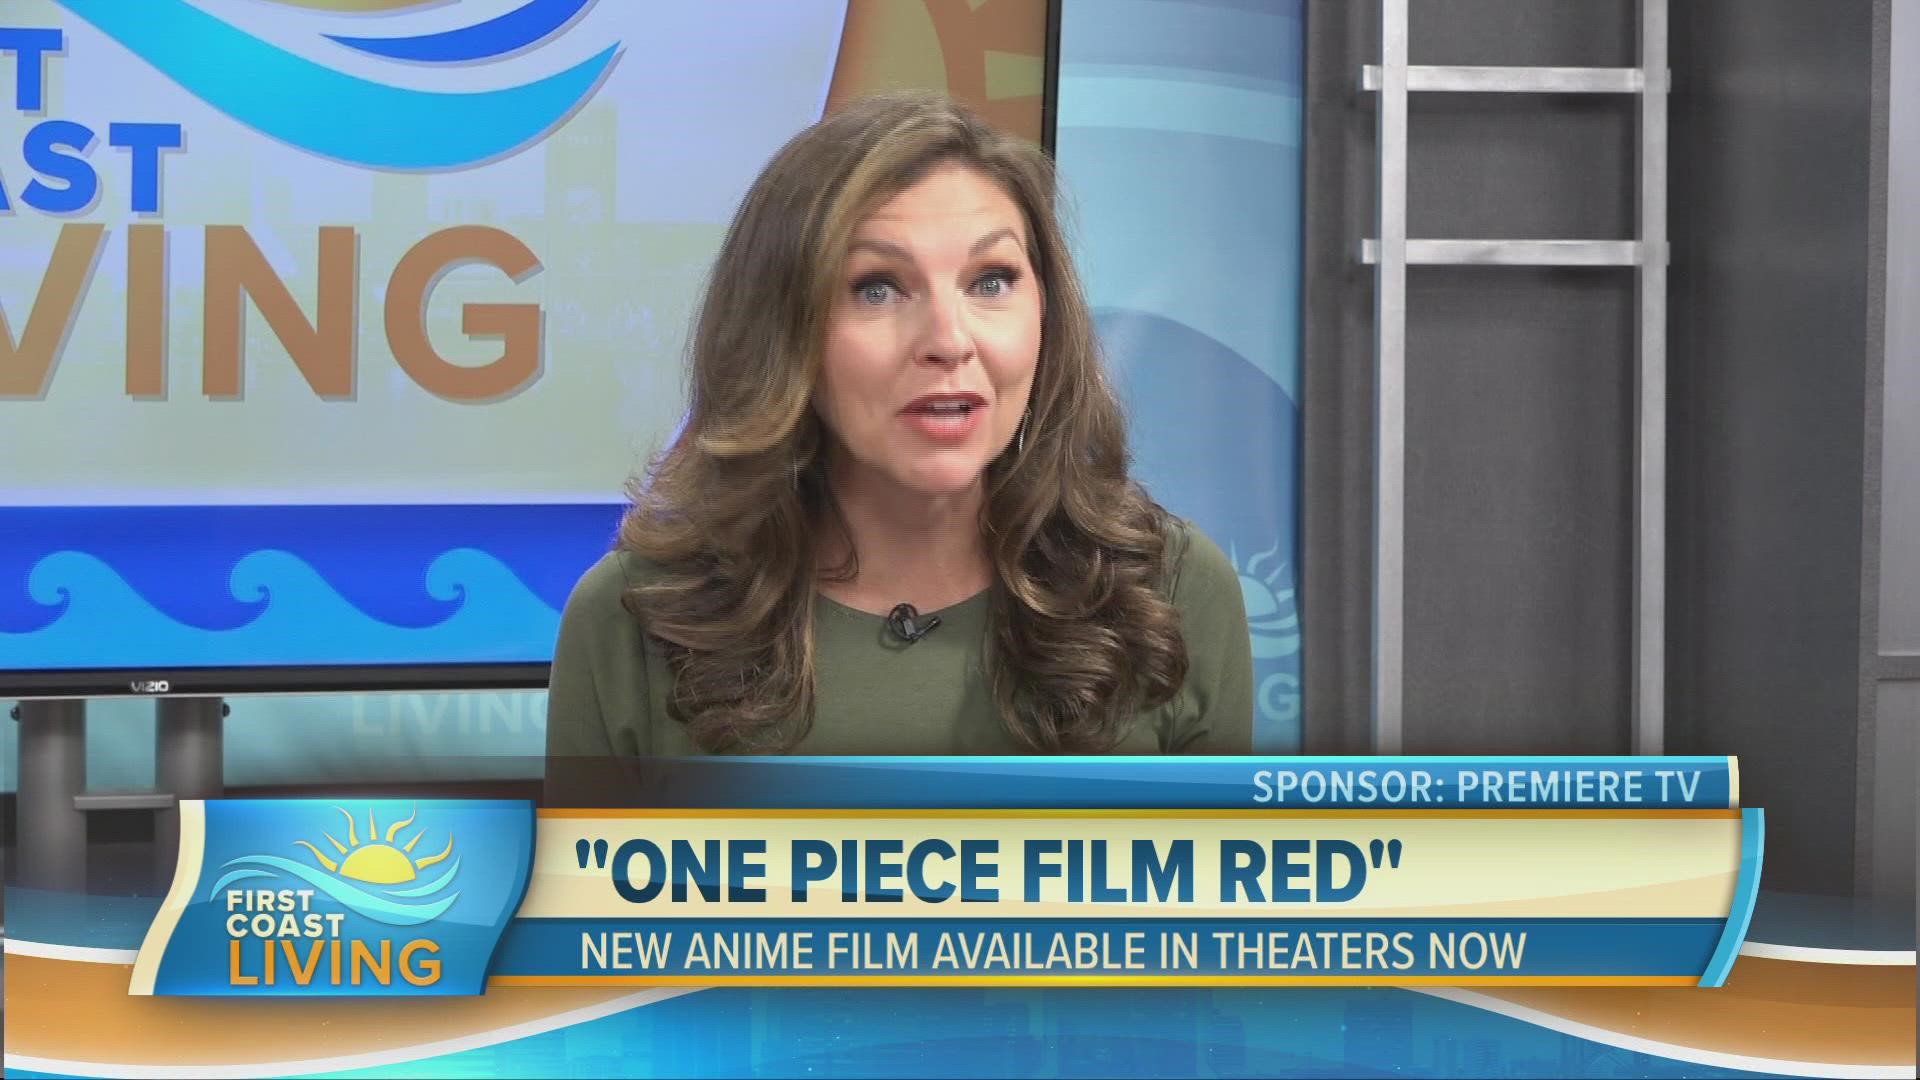 It's the new thing! Find out why in a new anime film is now out at area theatres.